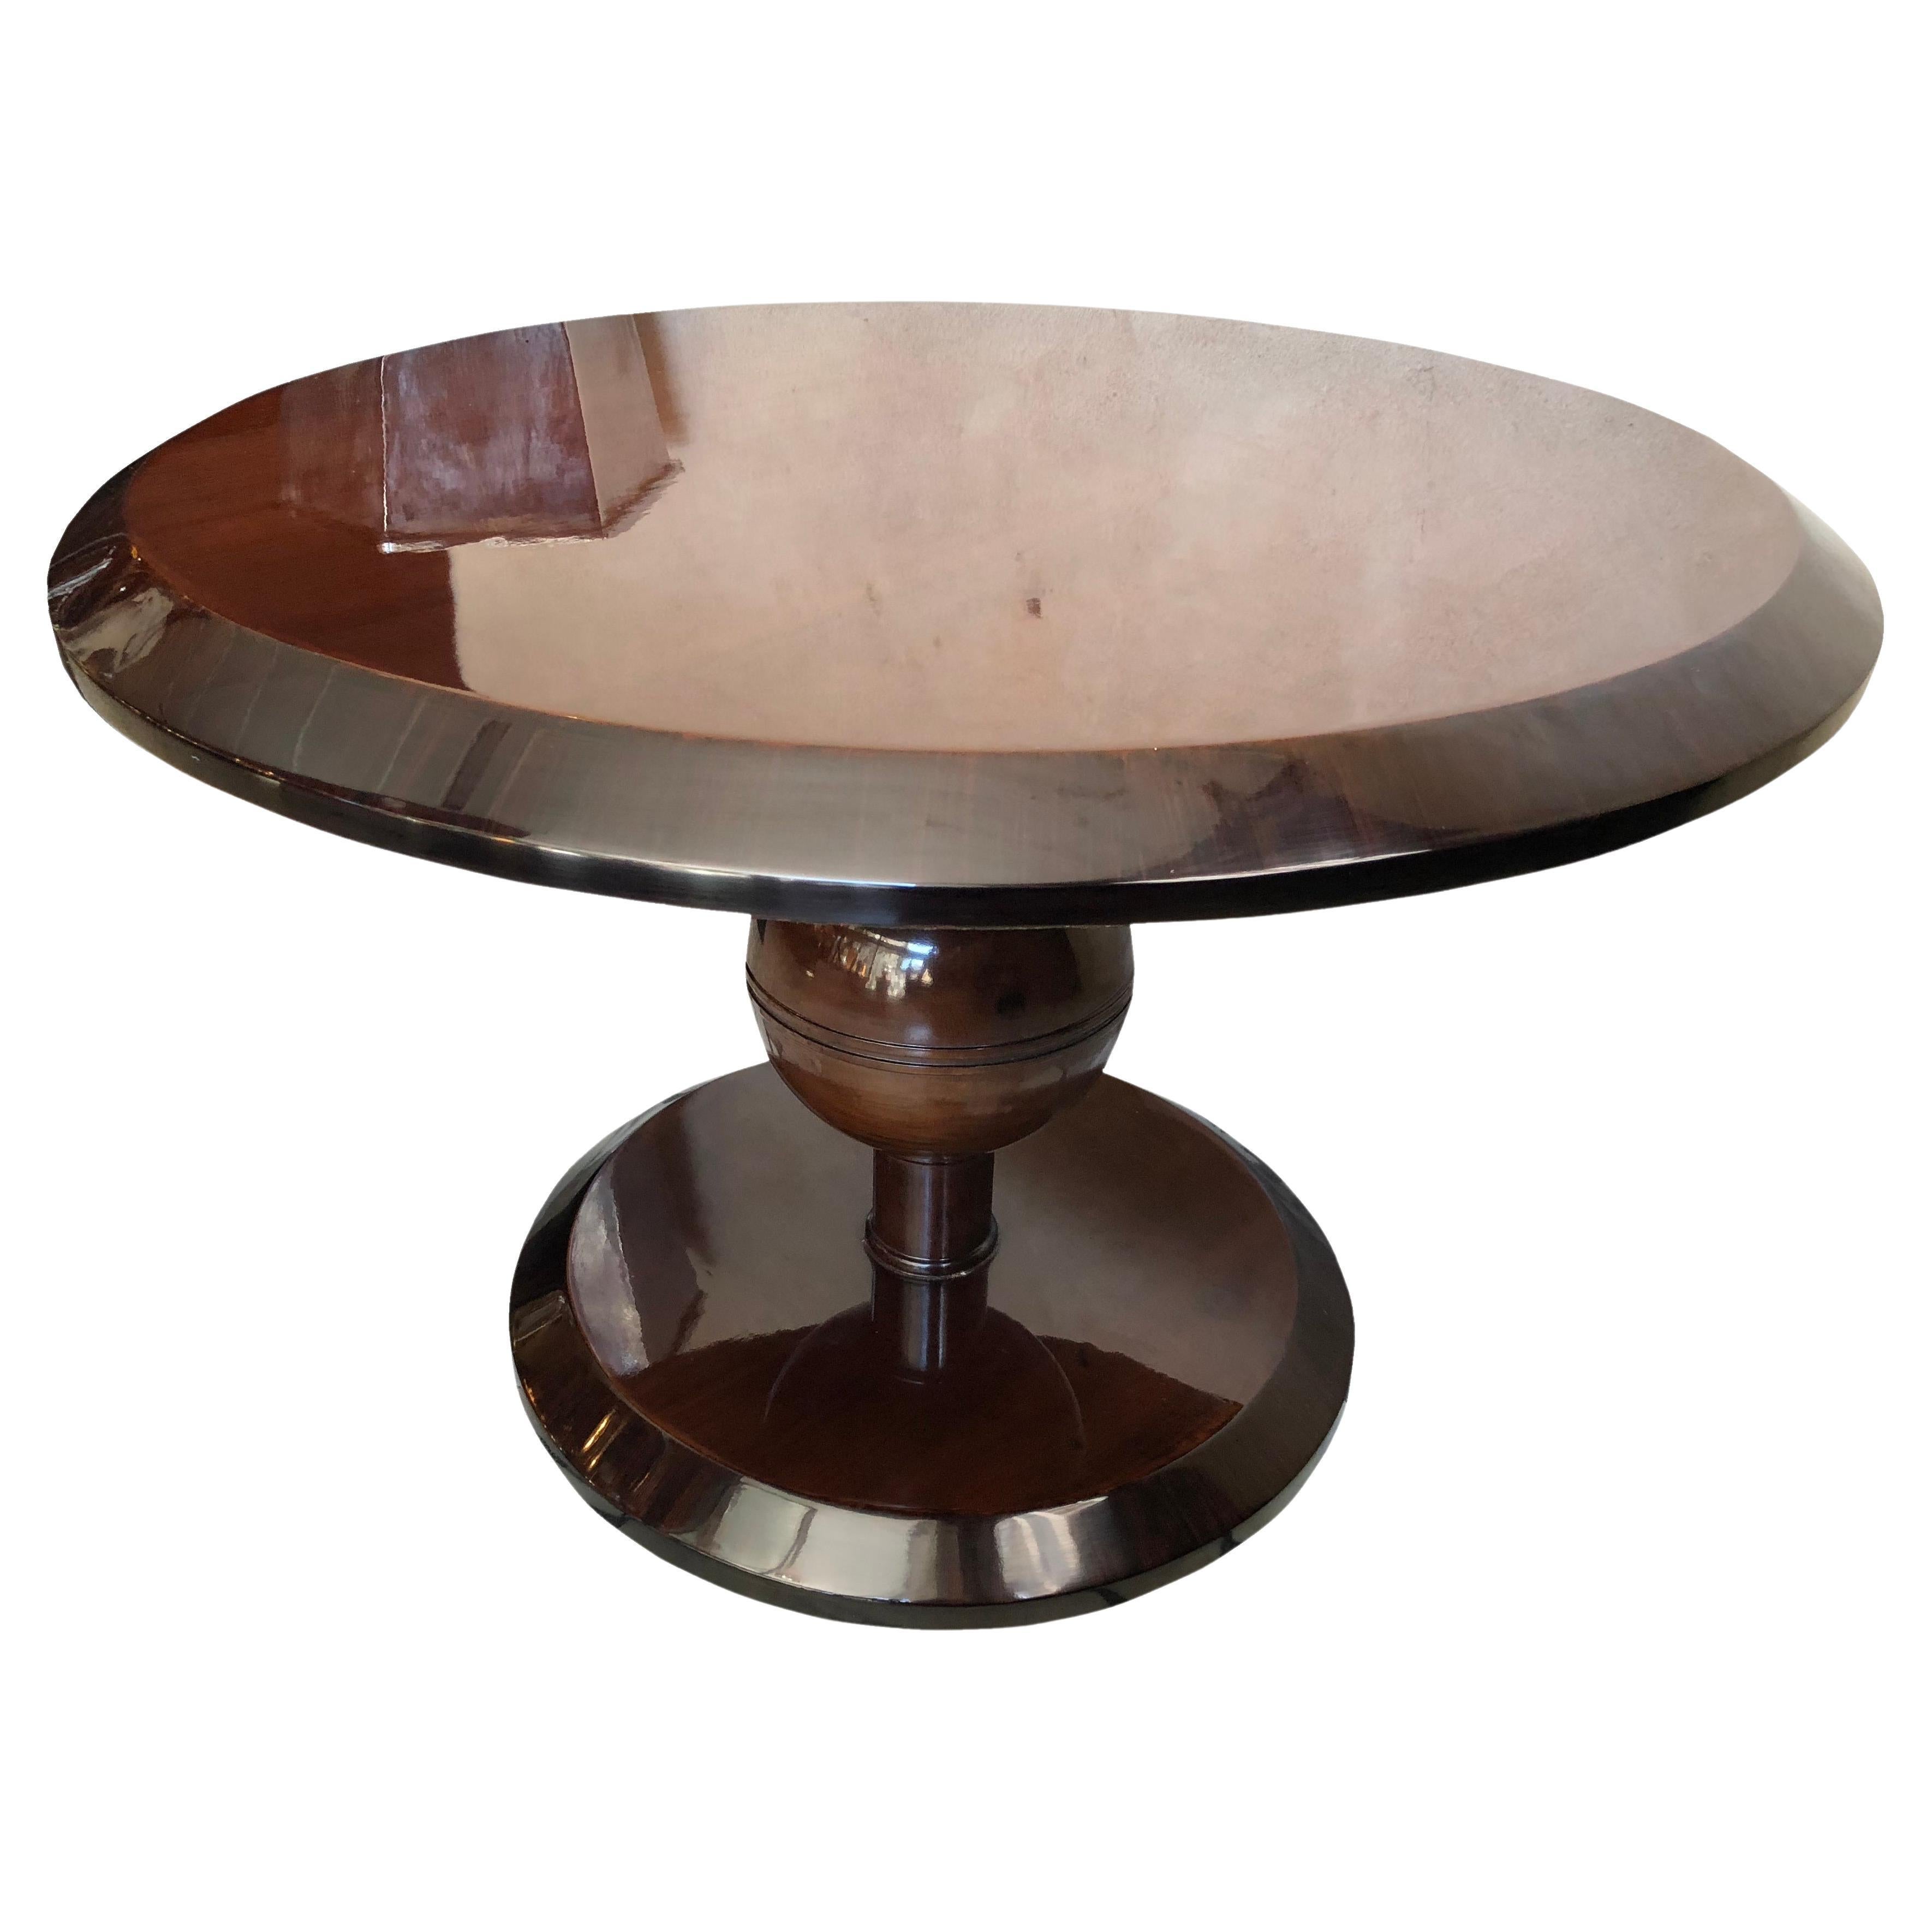 Coffe Table, Style Art Deco, Year: 1938, Country France